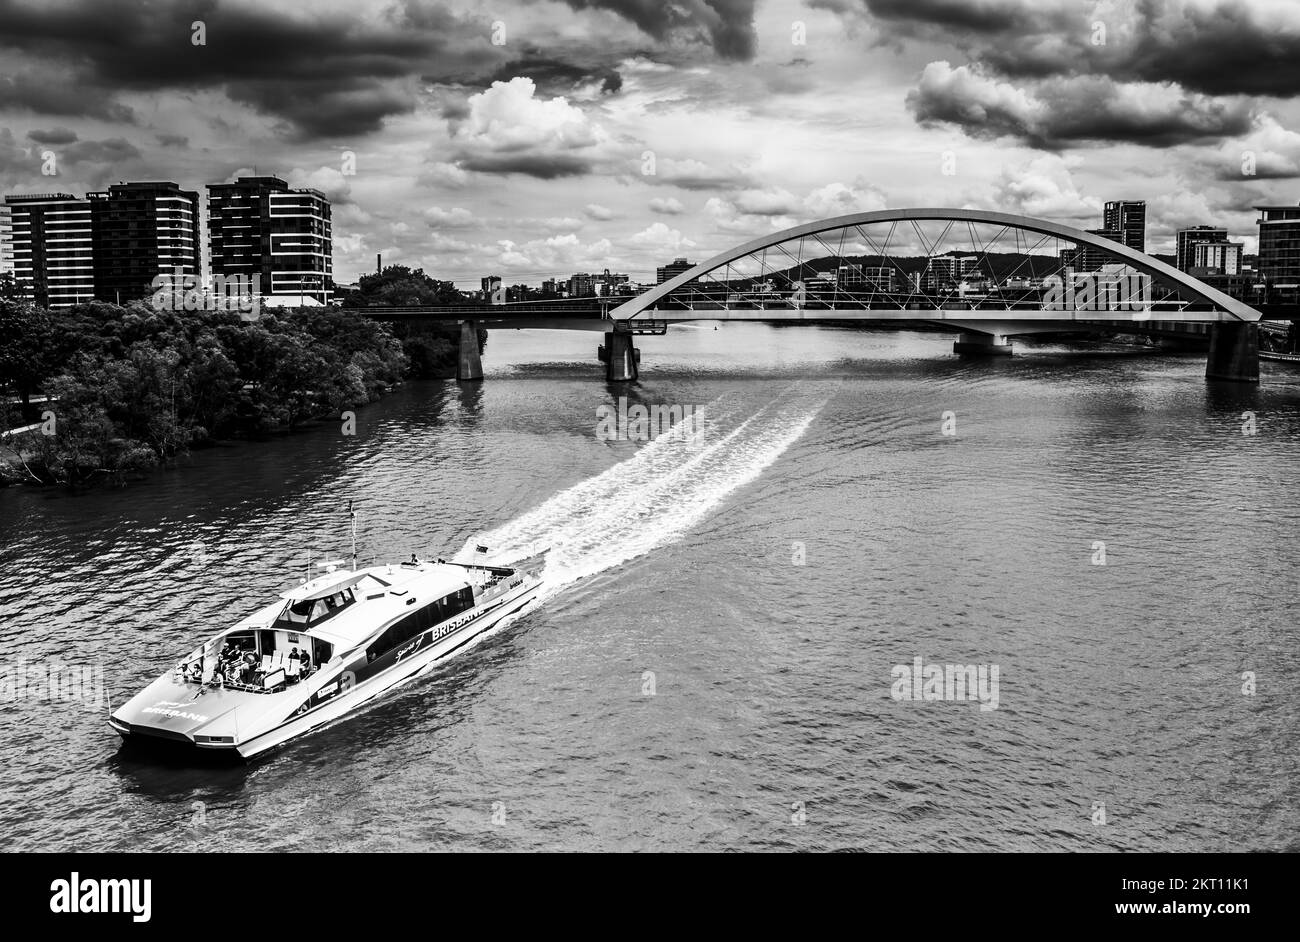 Contrasted scene of metropolitan modernism with ferry boats and moody urban condition. Brisbane City, Queensland, Australia Stock Photo